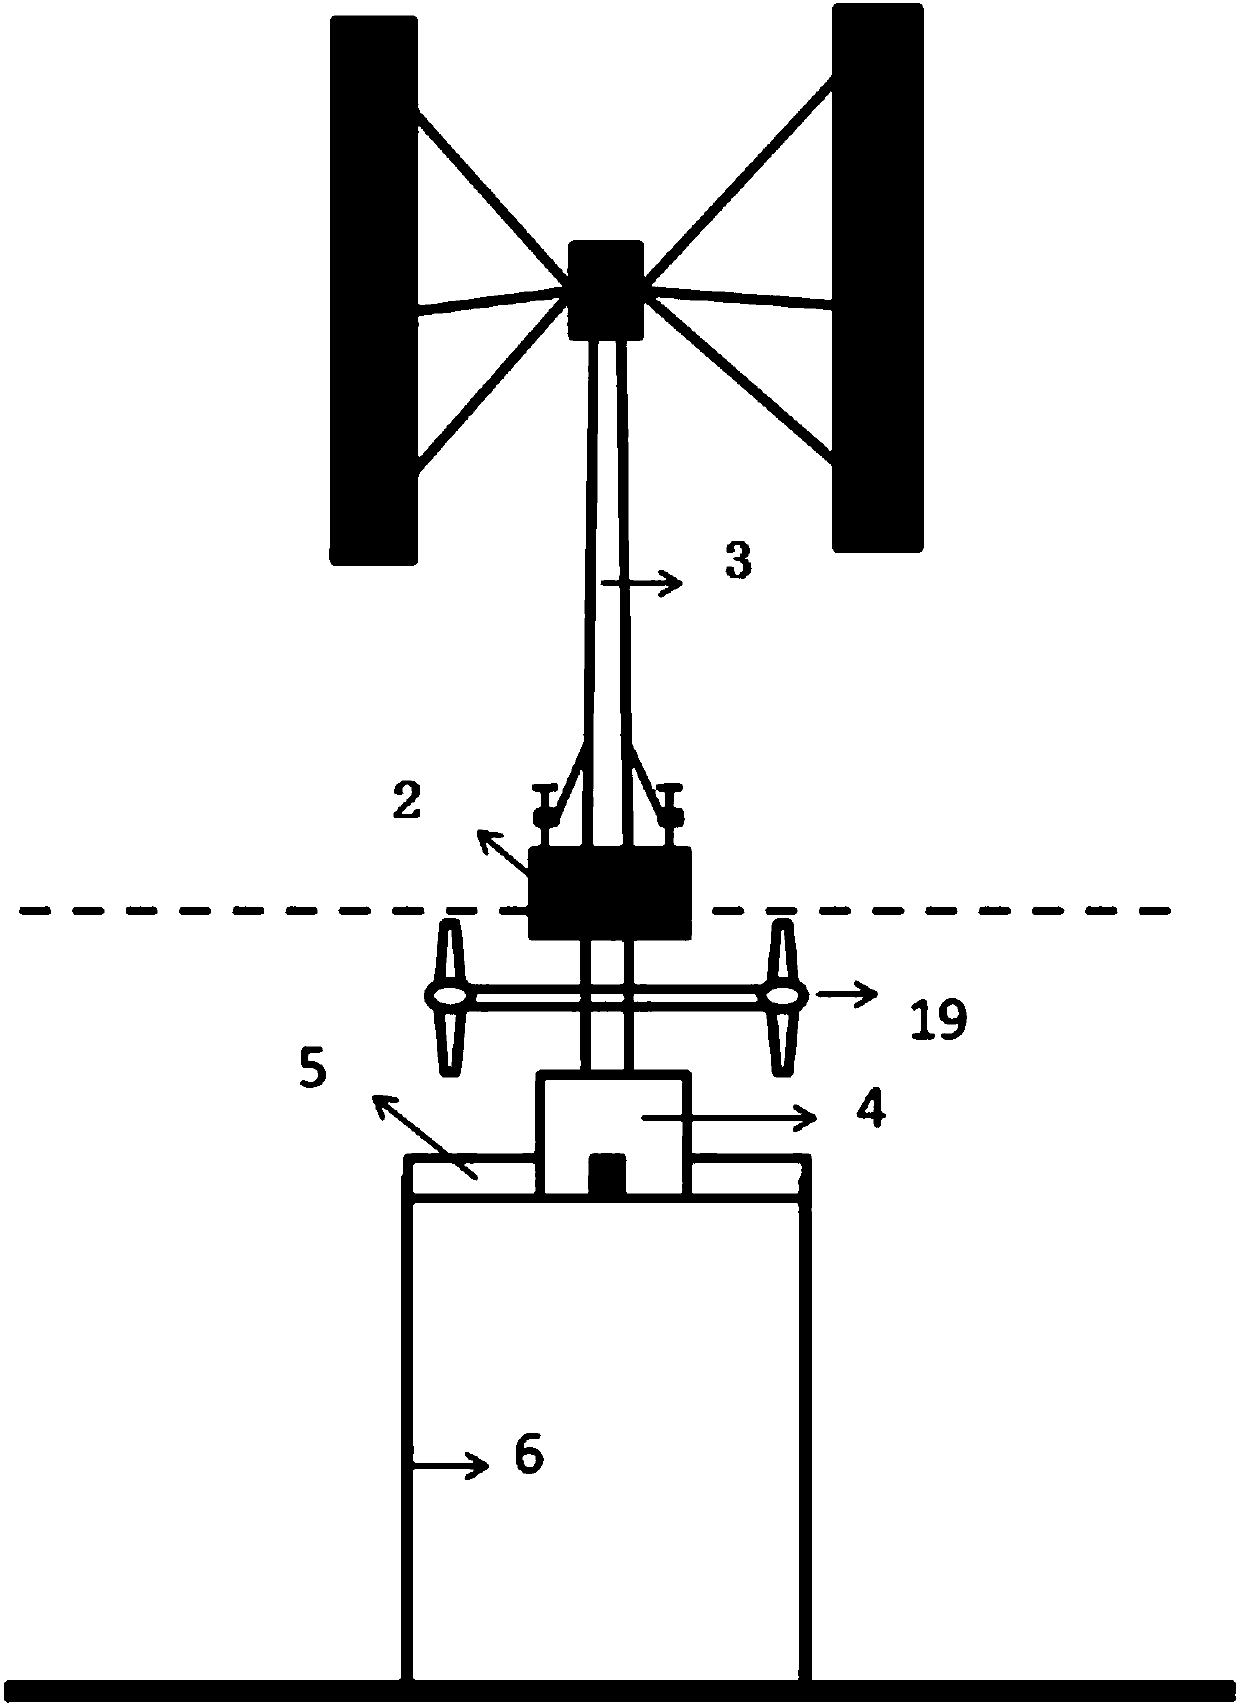 Vertical axis wind turbine-bi-directional wave energy device-tidal current energy device integrated structure based on tension leg platform